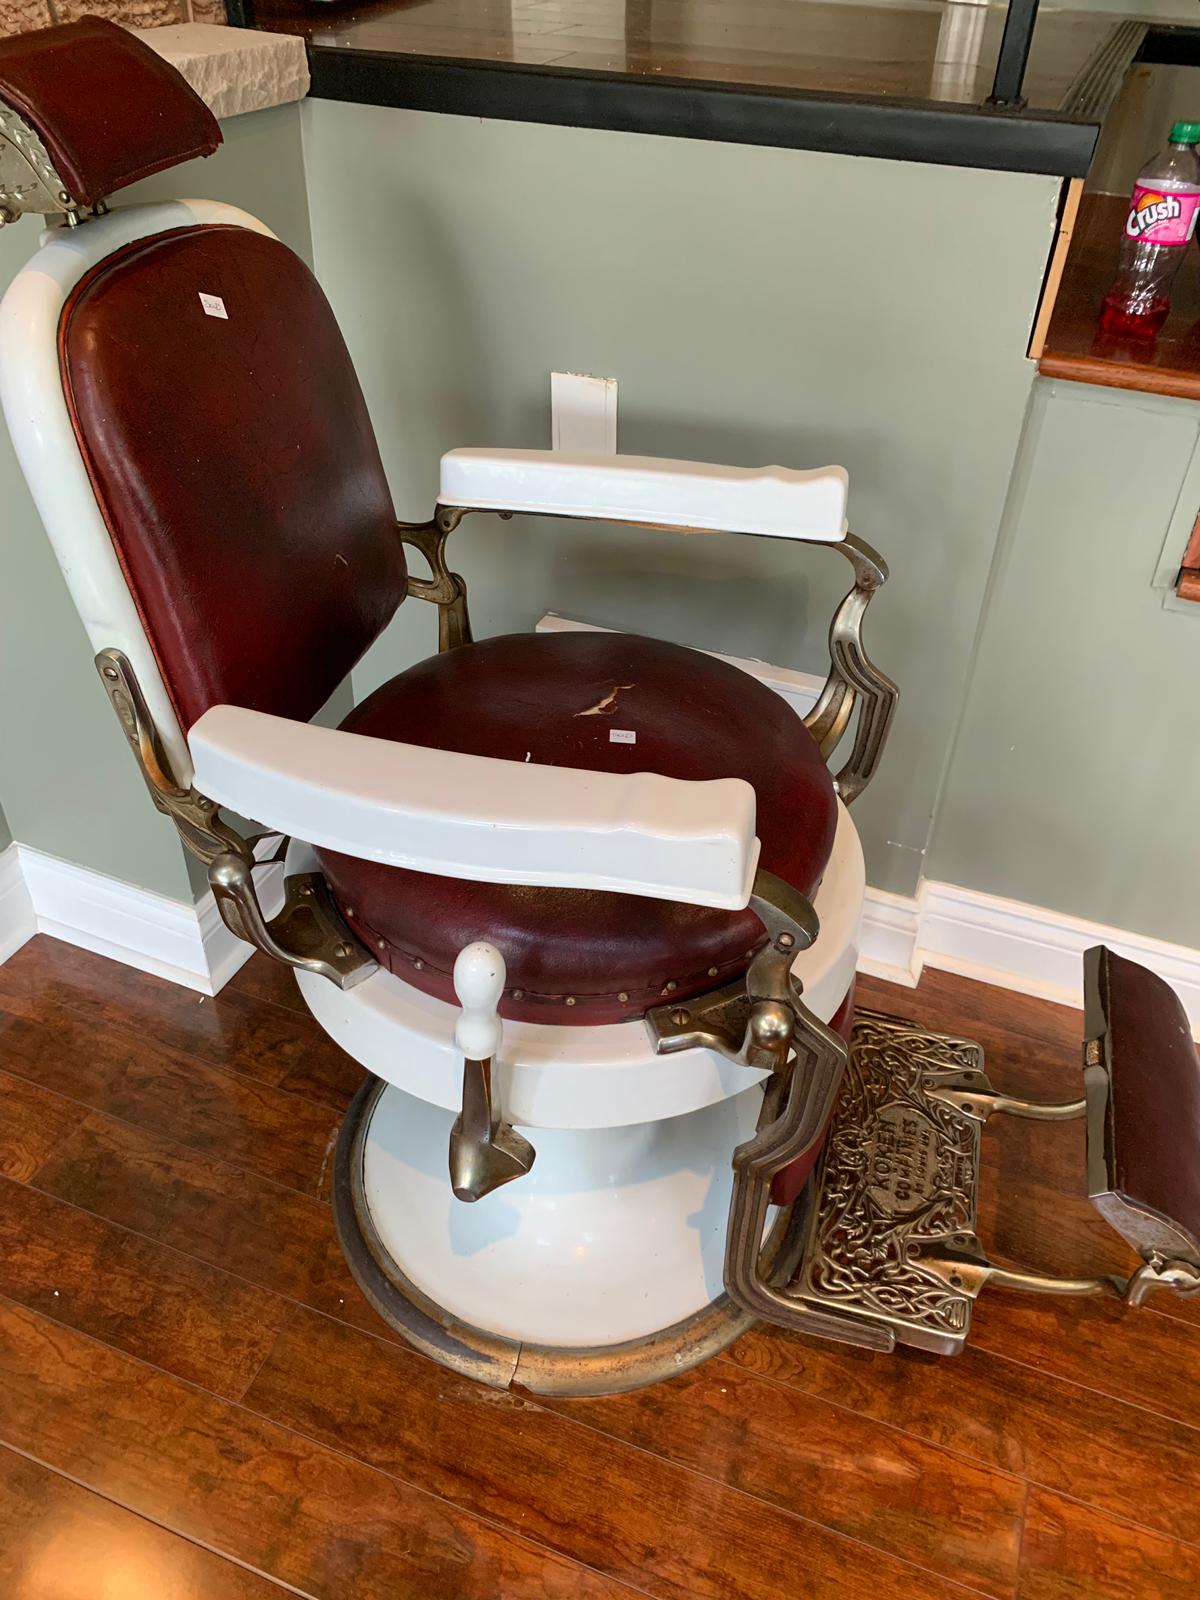 Koken Barber chairs get fixed up by Fade Room. Toronto, Canada